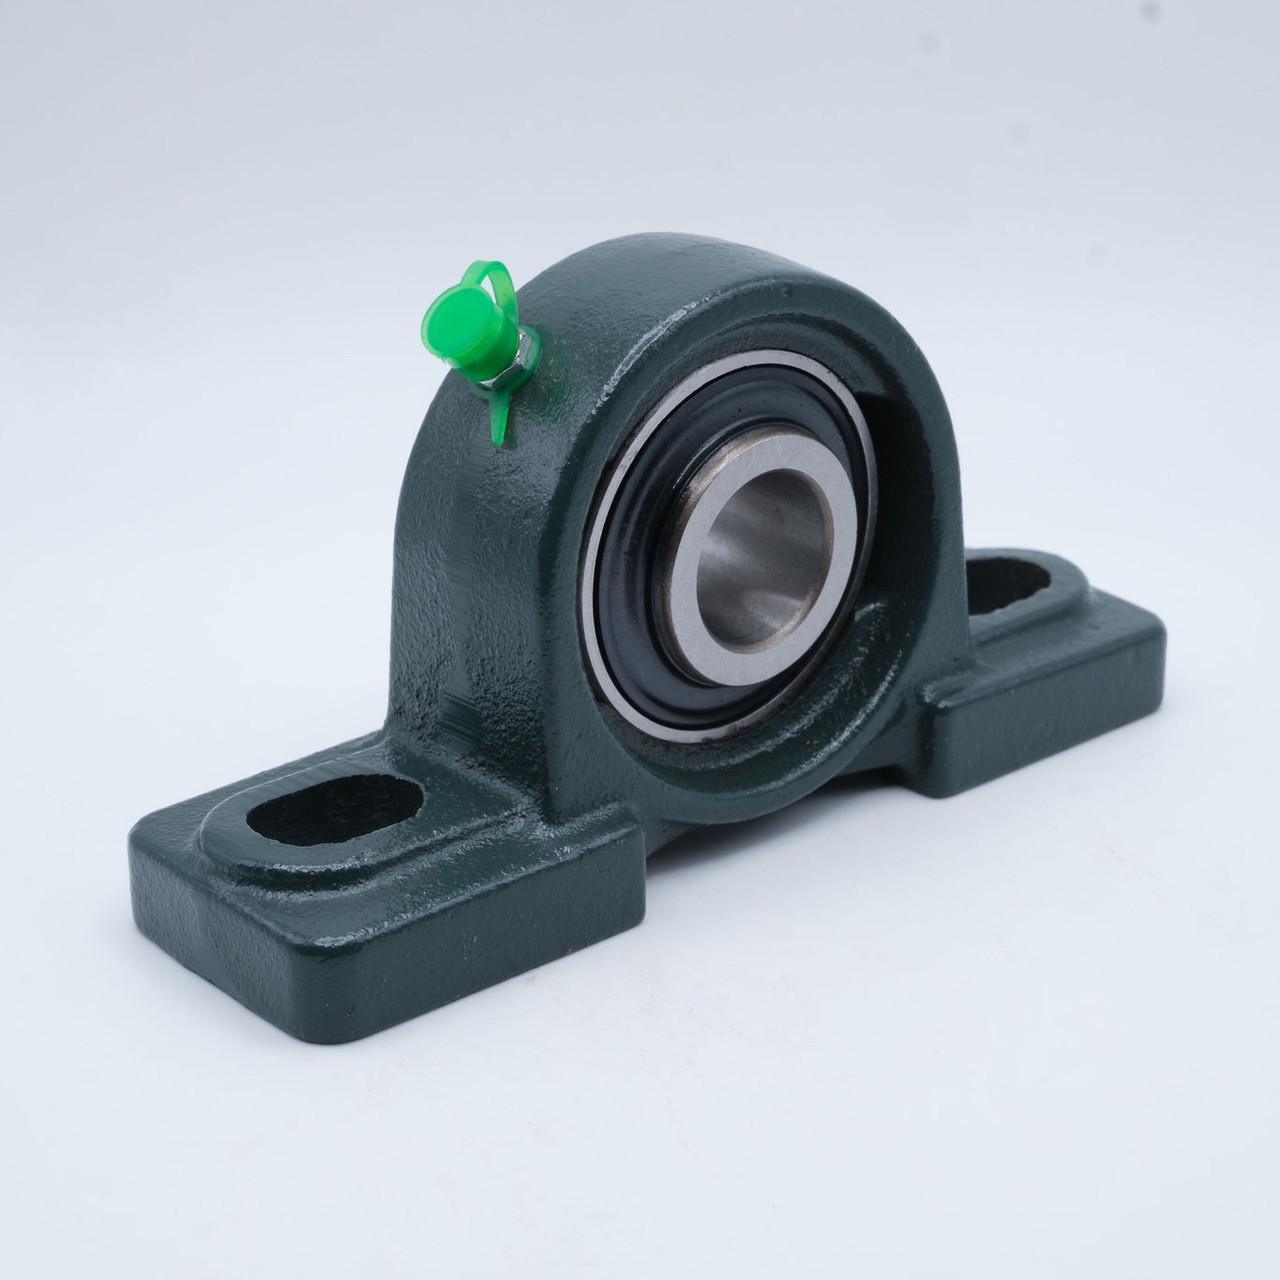 UCP209-26 Pillow Block Unit Bearing Shaft Size 1-5/8 Inches Side View